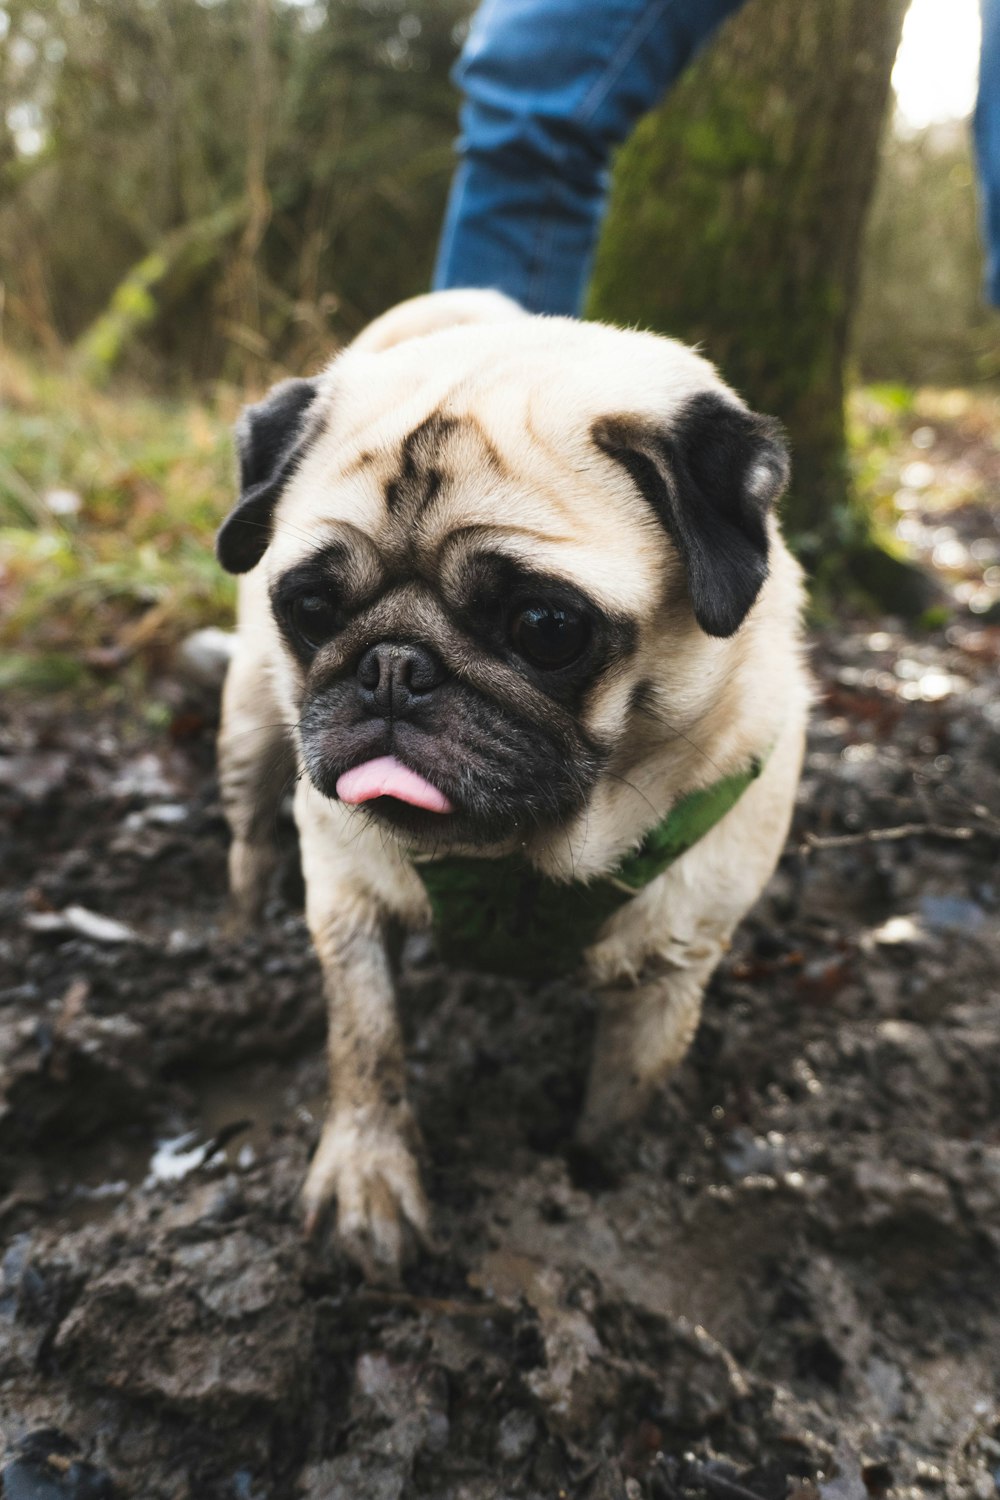 fawn pug on brown dirt